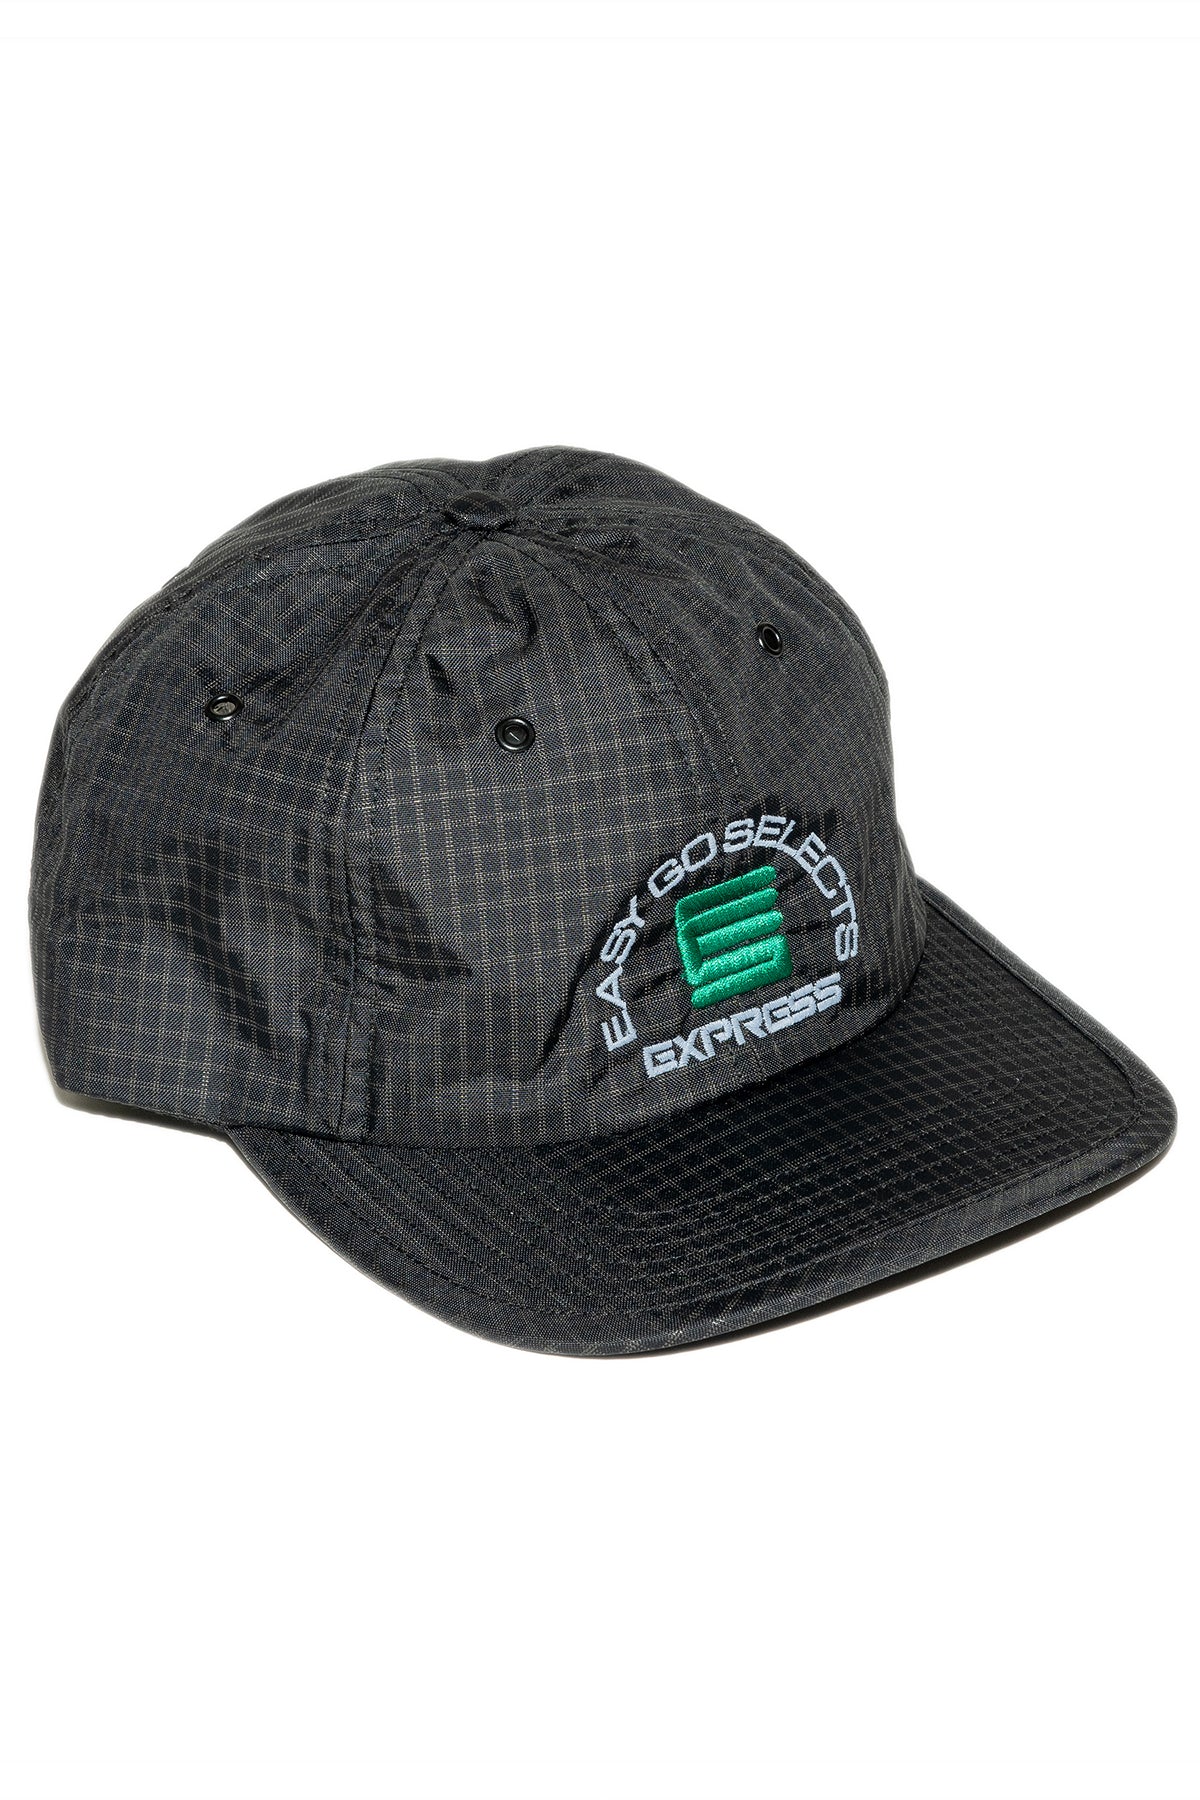 EASYGO SELECTS 6 PANEL – understory-shop